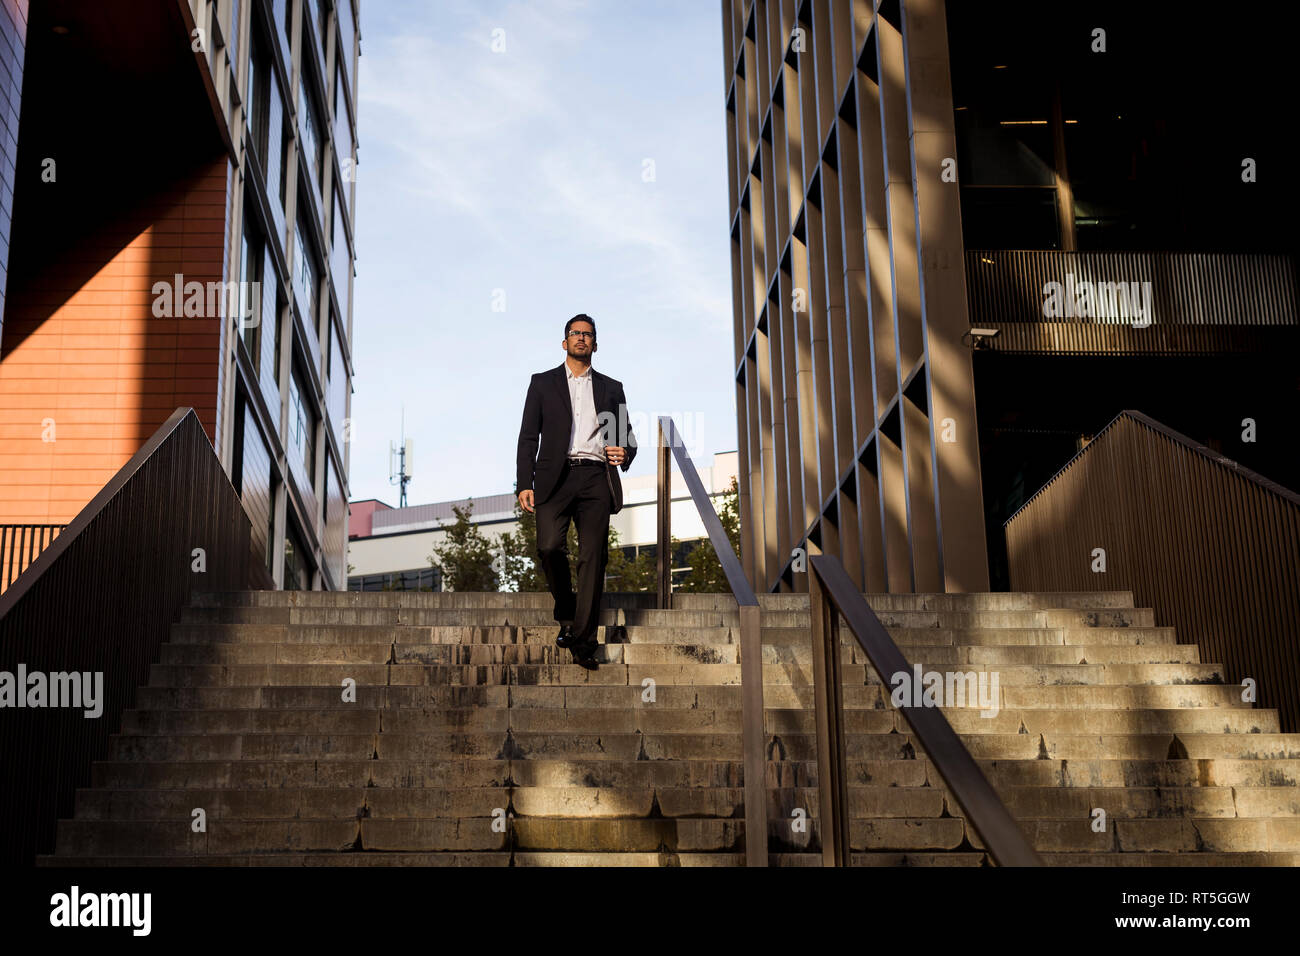 Businessman walking down stairs in the city Stock Photo